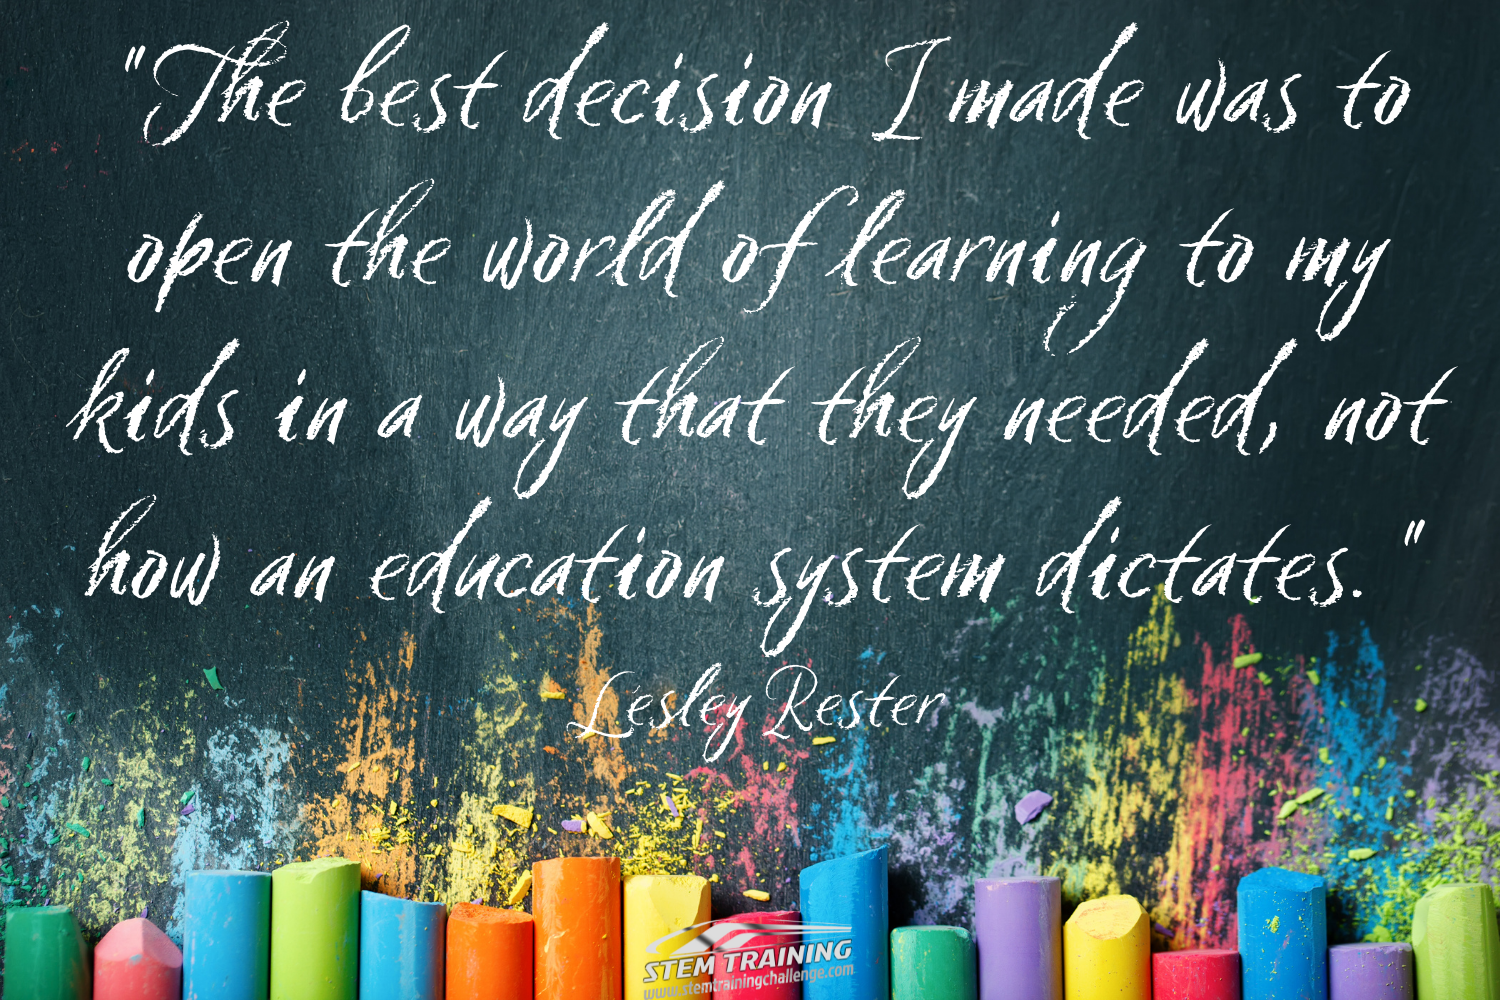 Quote by Lesley Rester about homeschooling choice